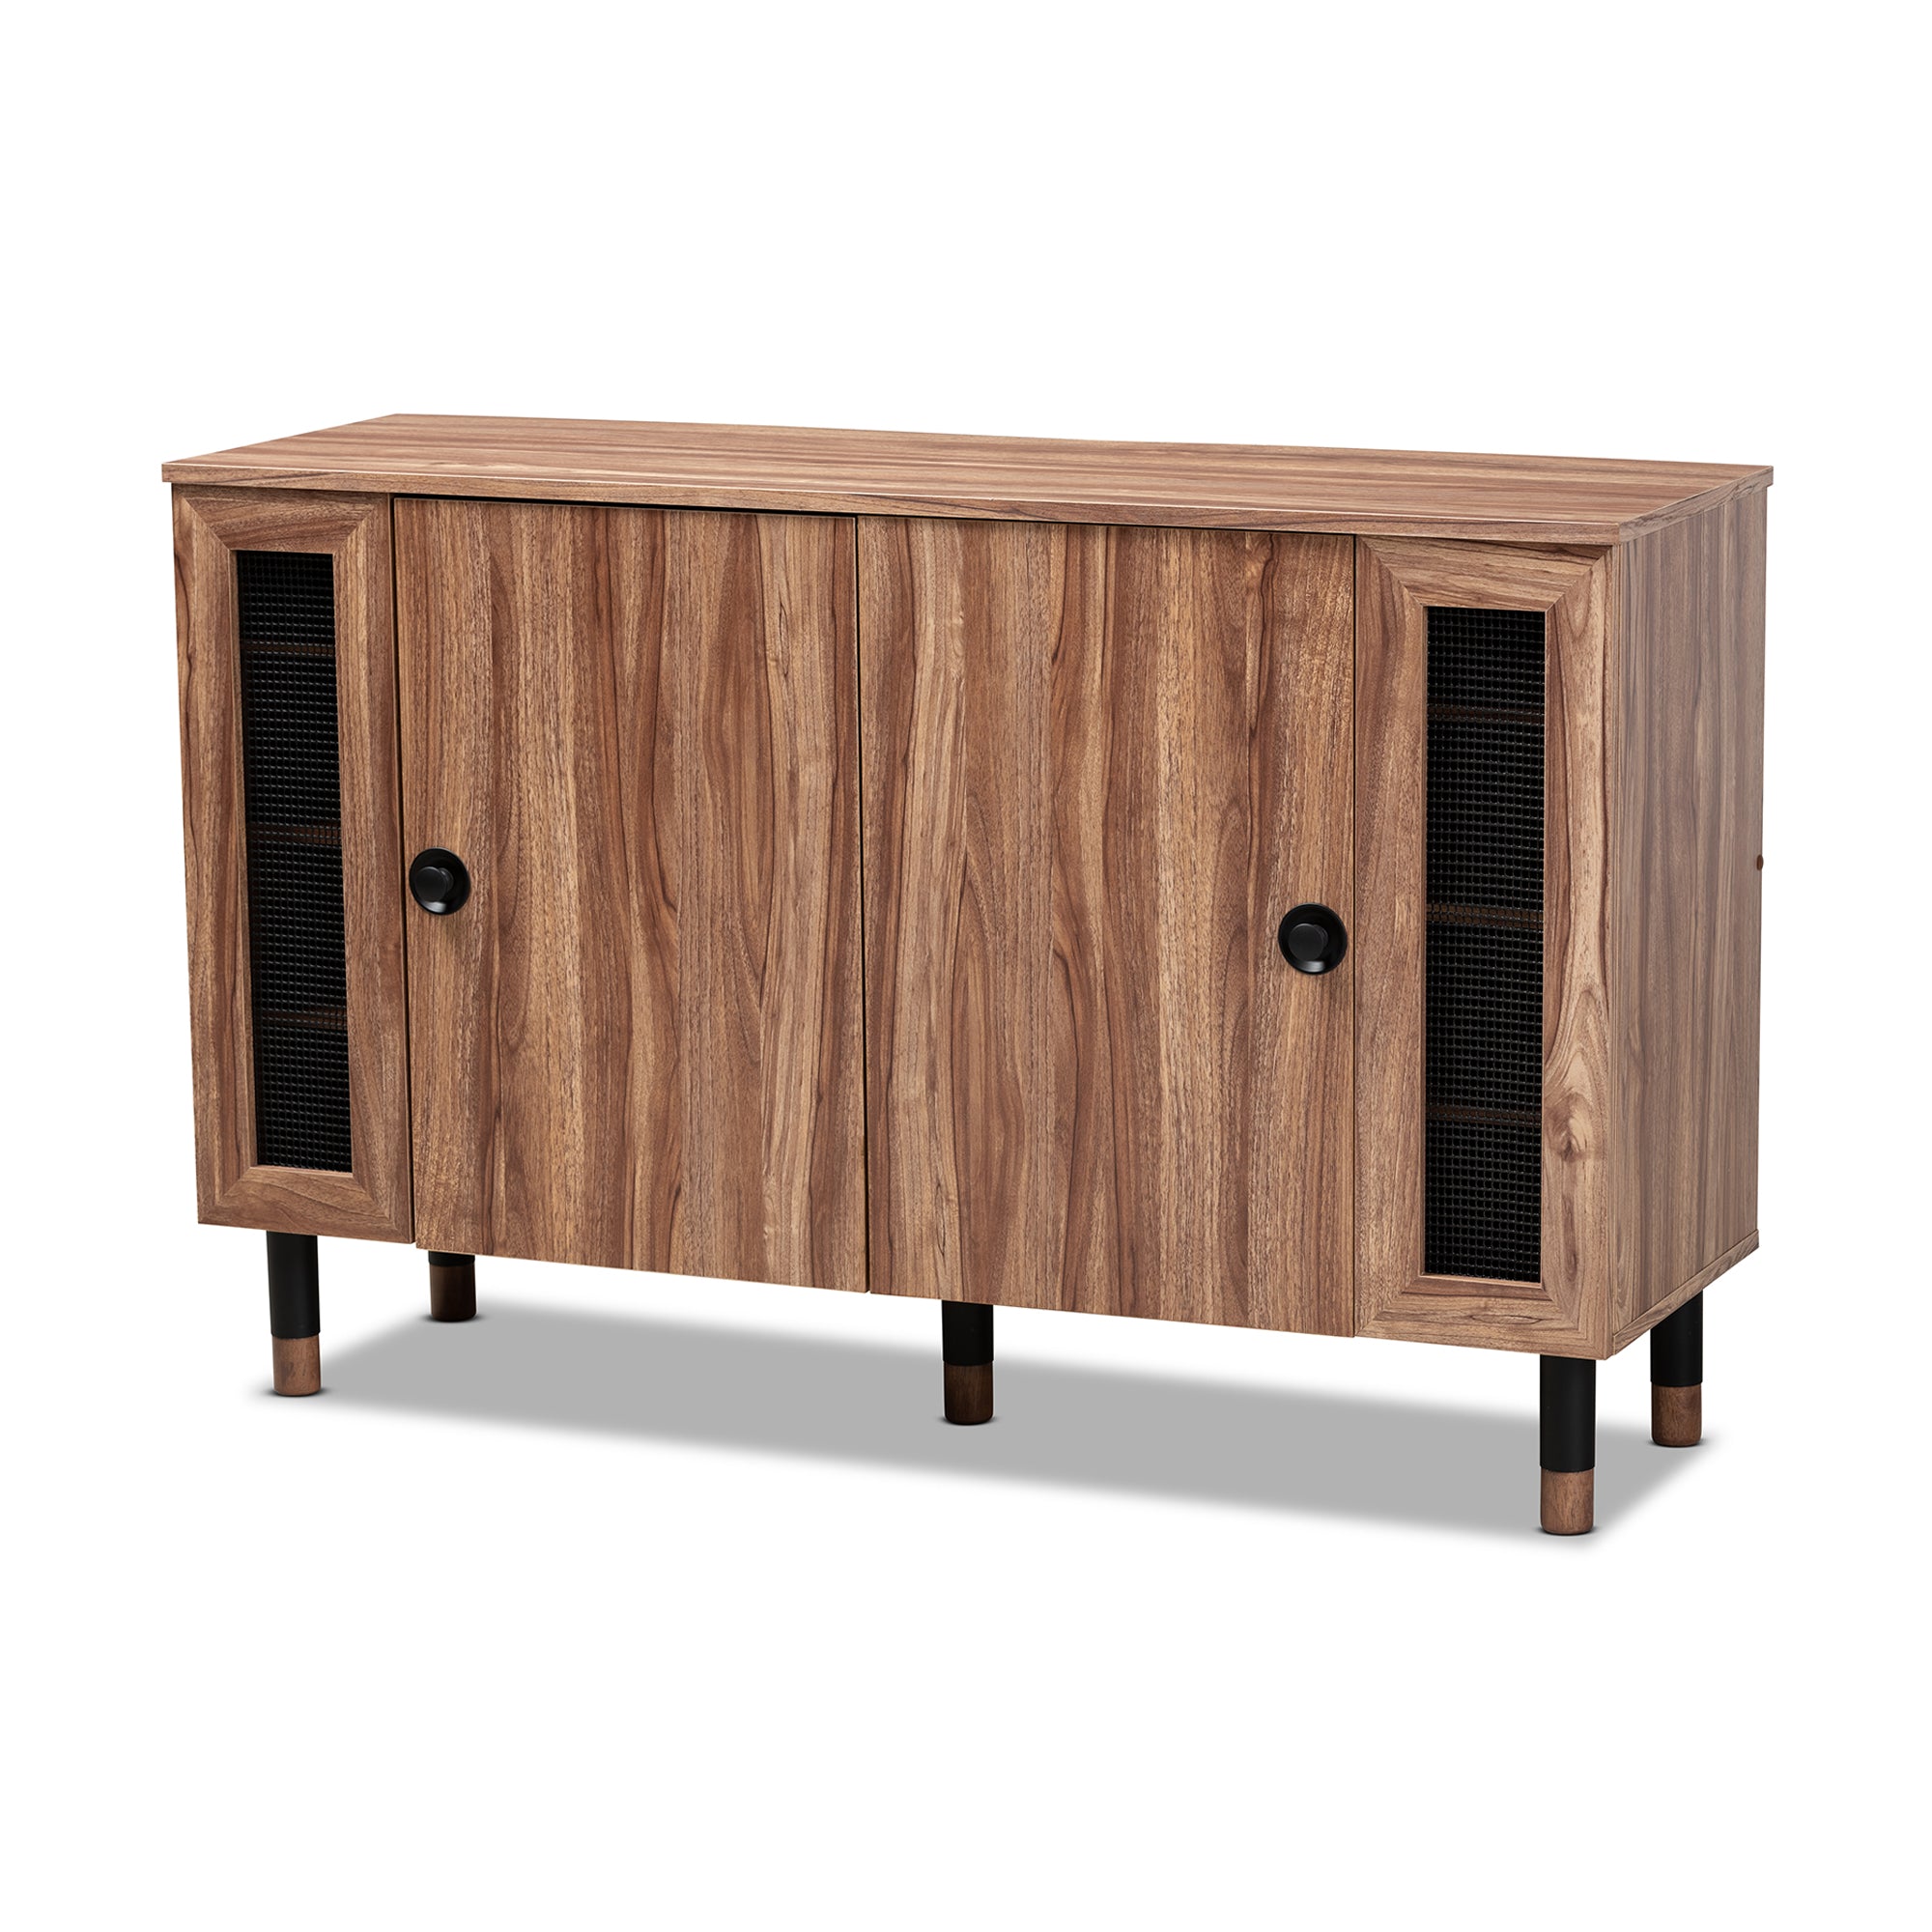 Valina Contemporary Shoe Cabinet 2-Door with Screen Inserts-Shoe Cabinet-Baxton Studio - WI-Wall2Wall Furnishings